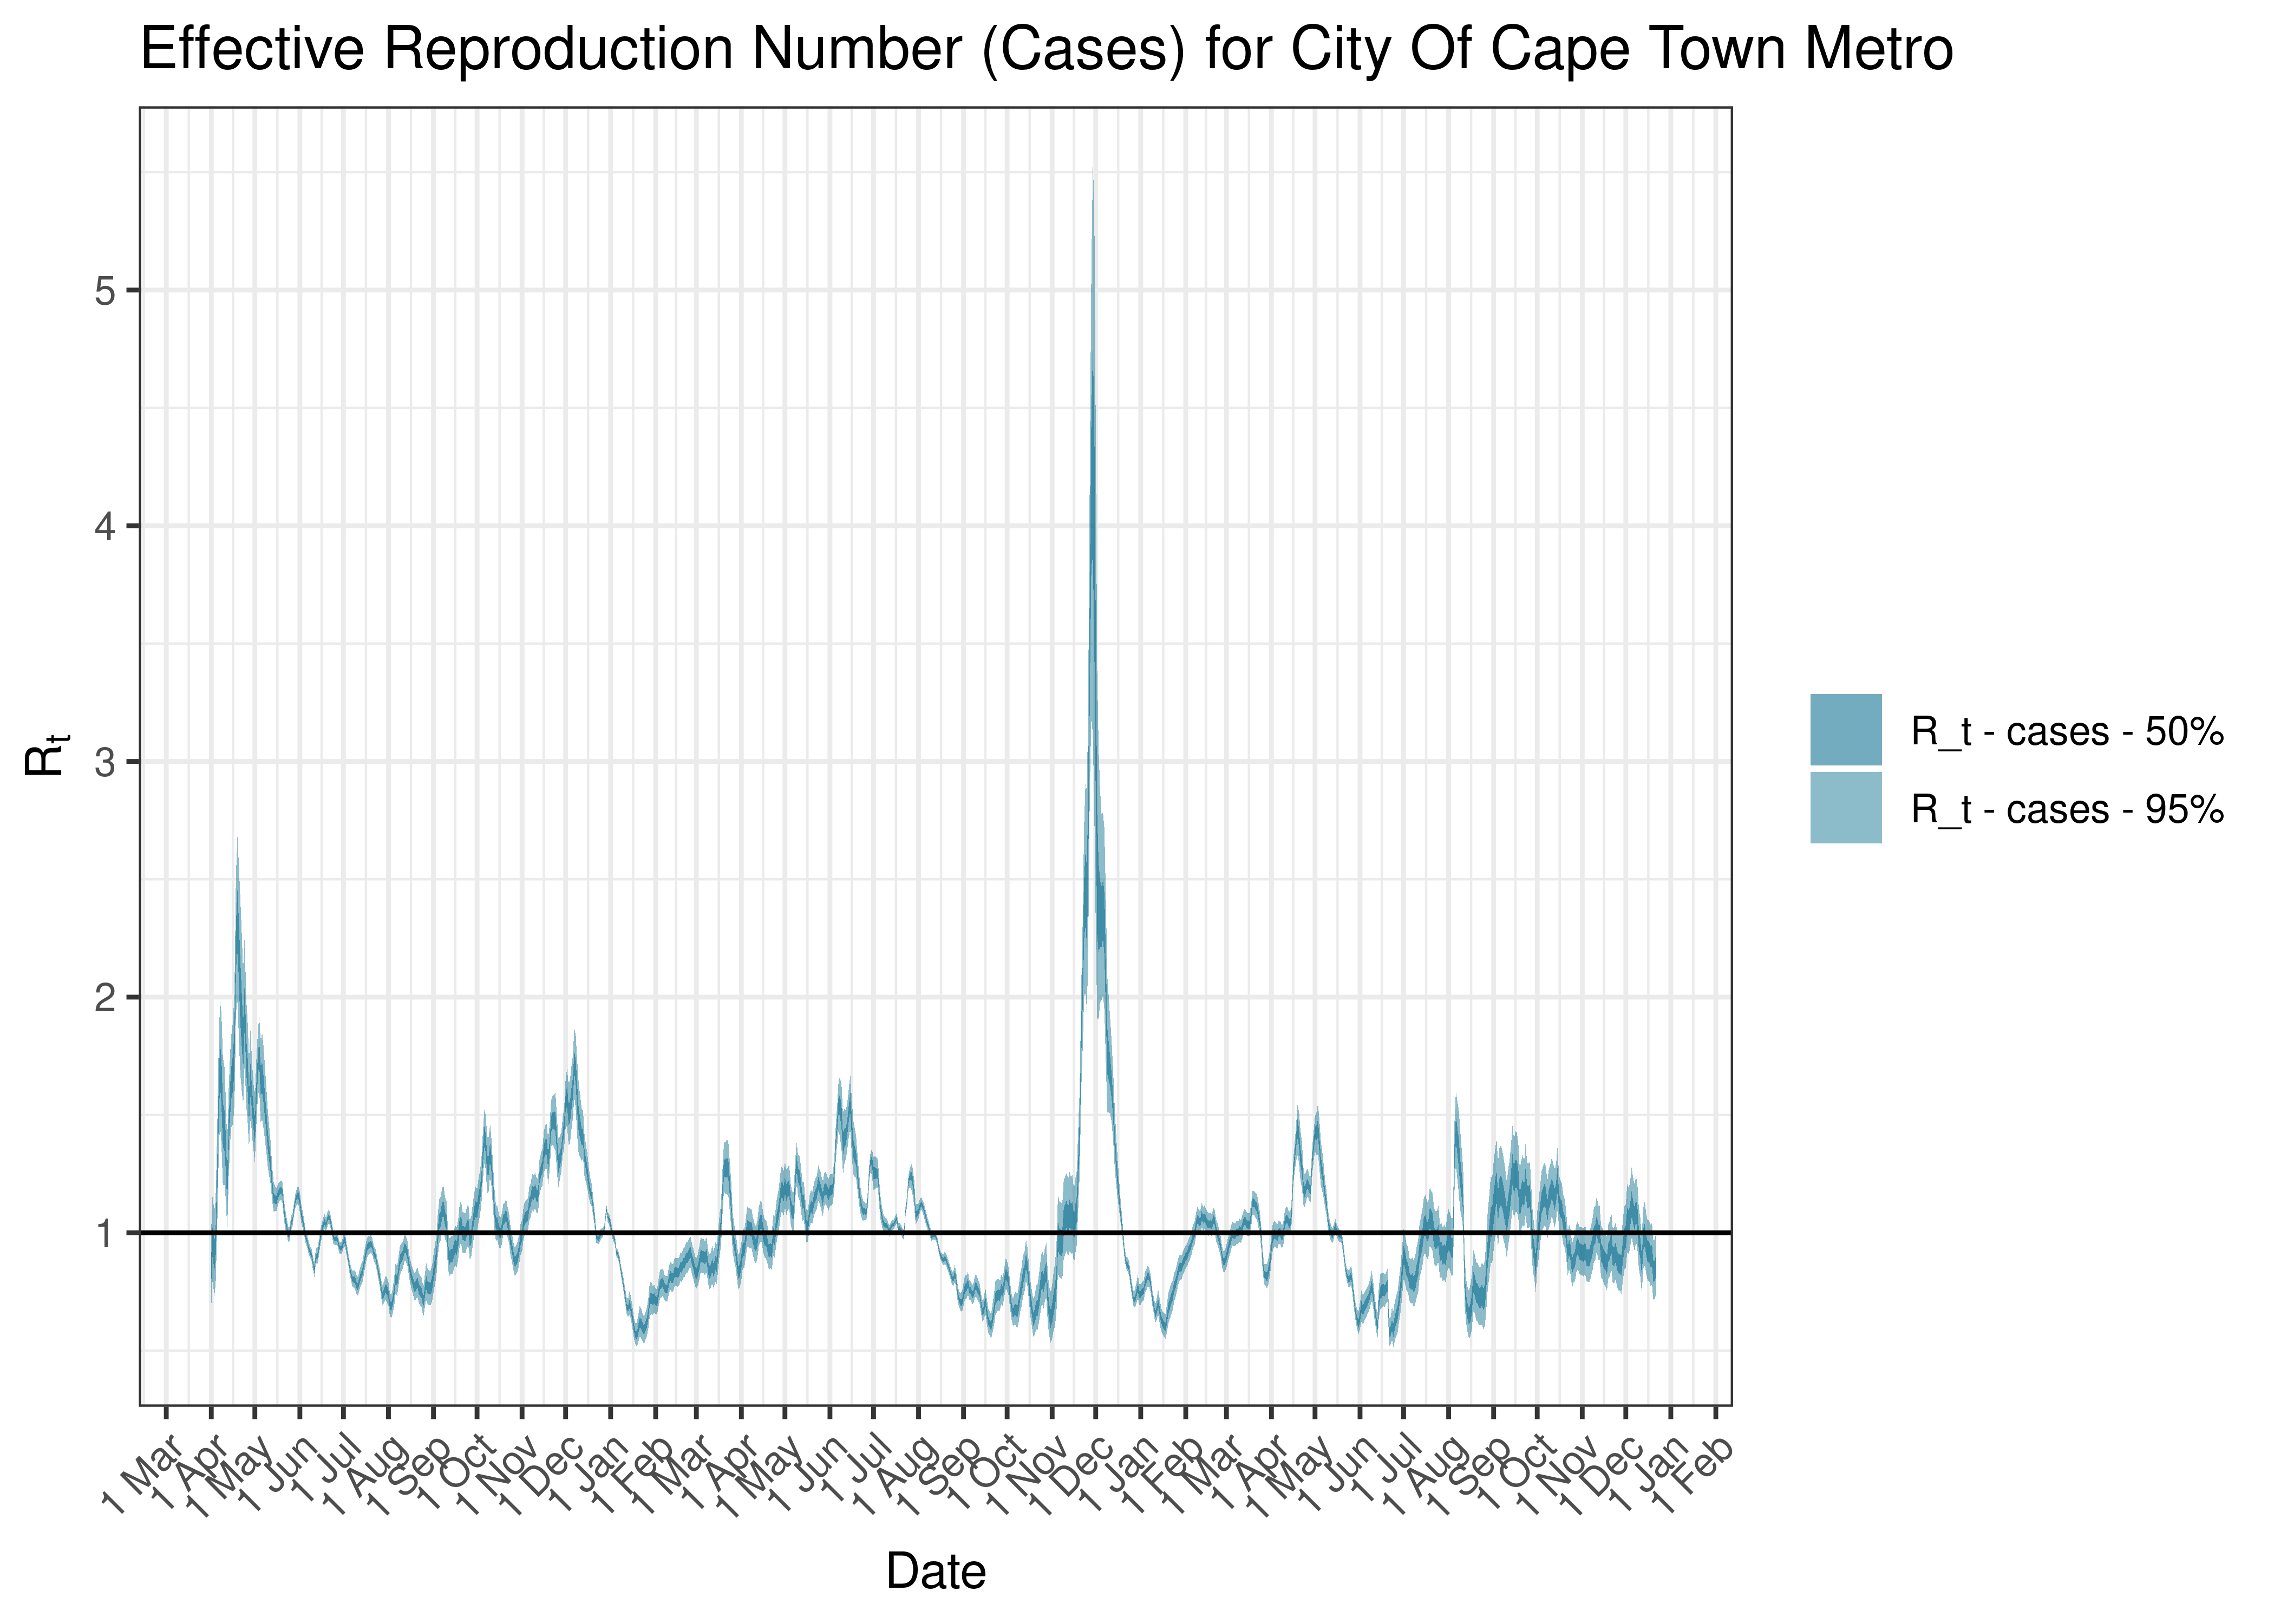 Estimated Effective Reproduction Number Based on Cases for City Of Cape Town Metro since 1 April 2020